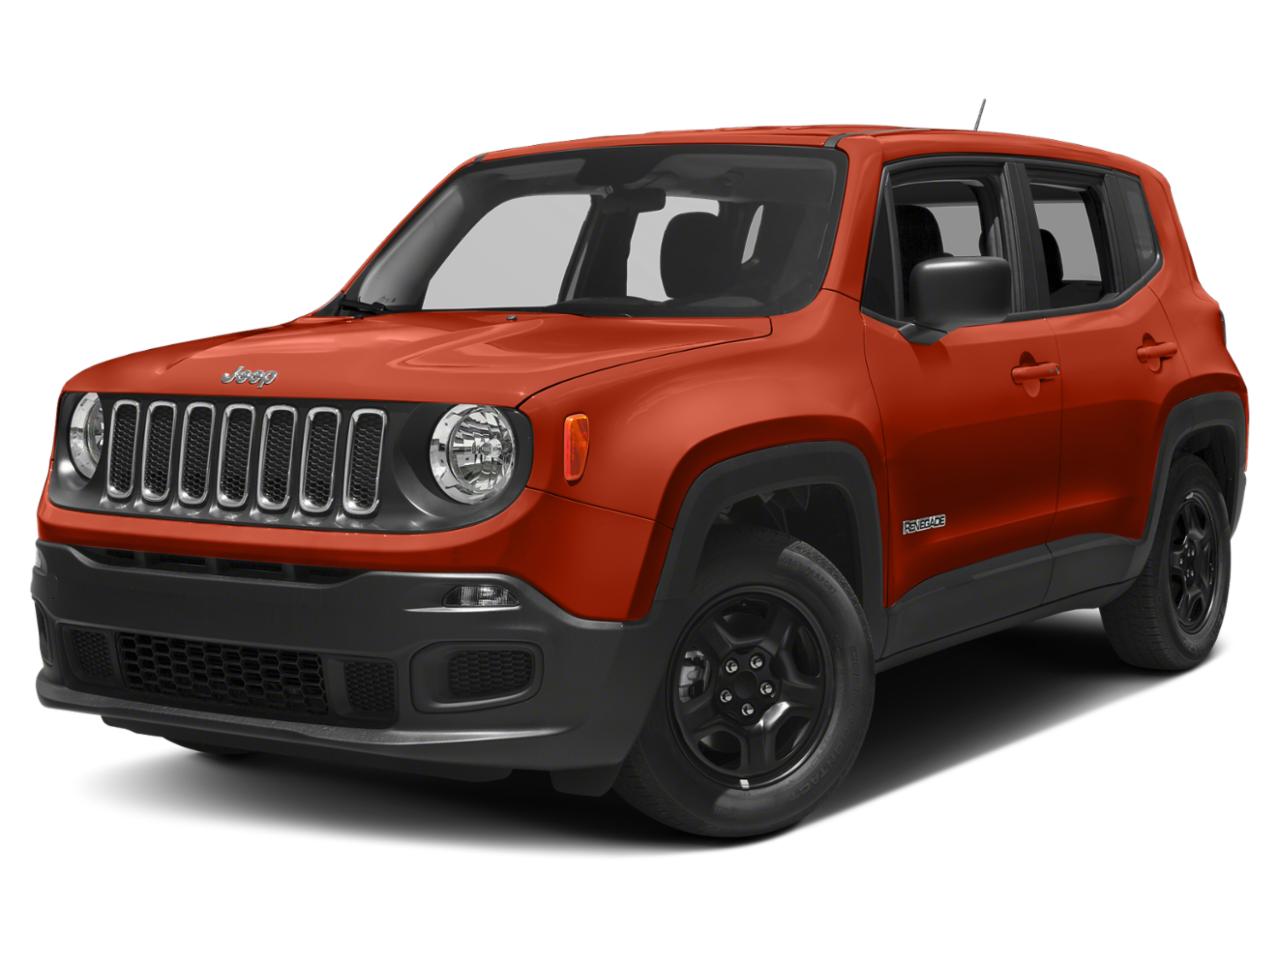 2018 Jeep Renegade Vehicle Photo in ZELIENOPLE, PA 16063-2910